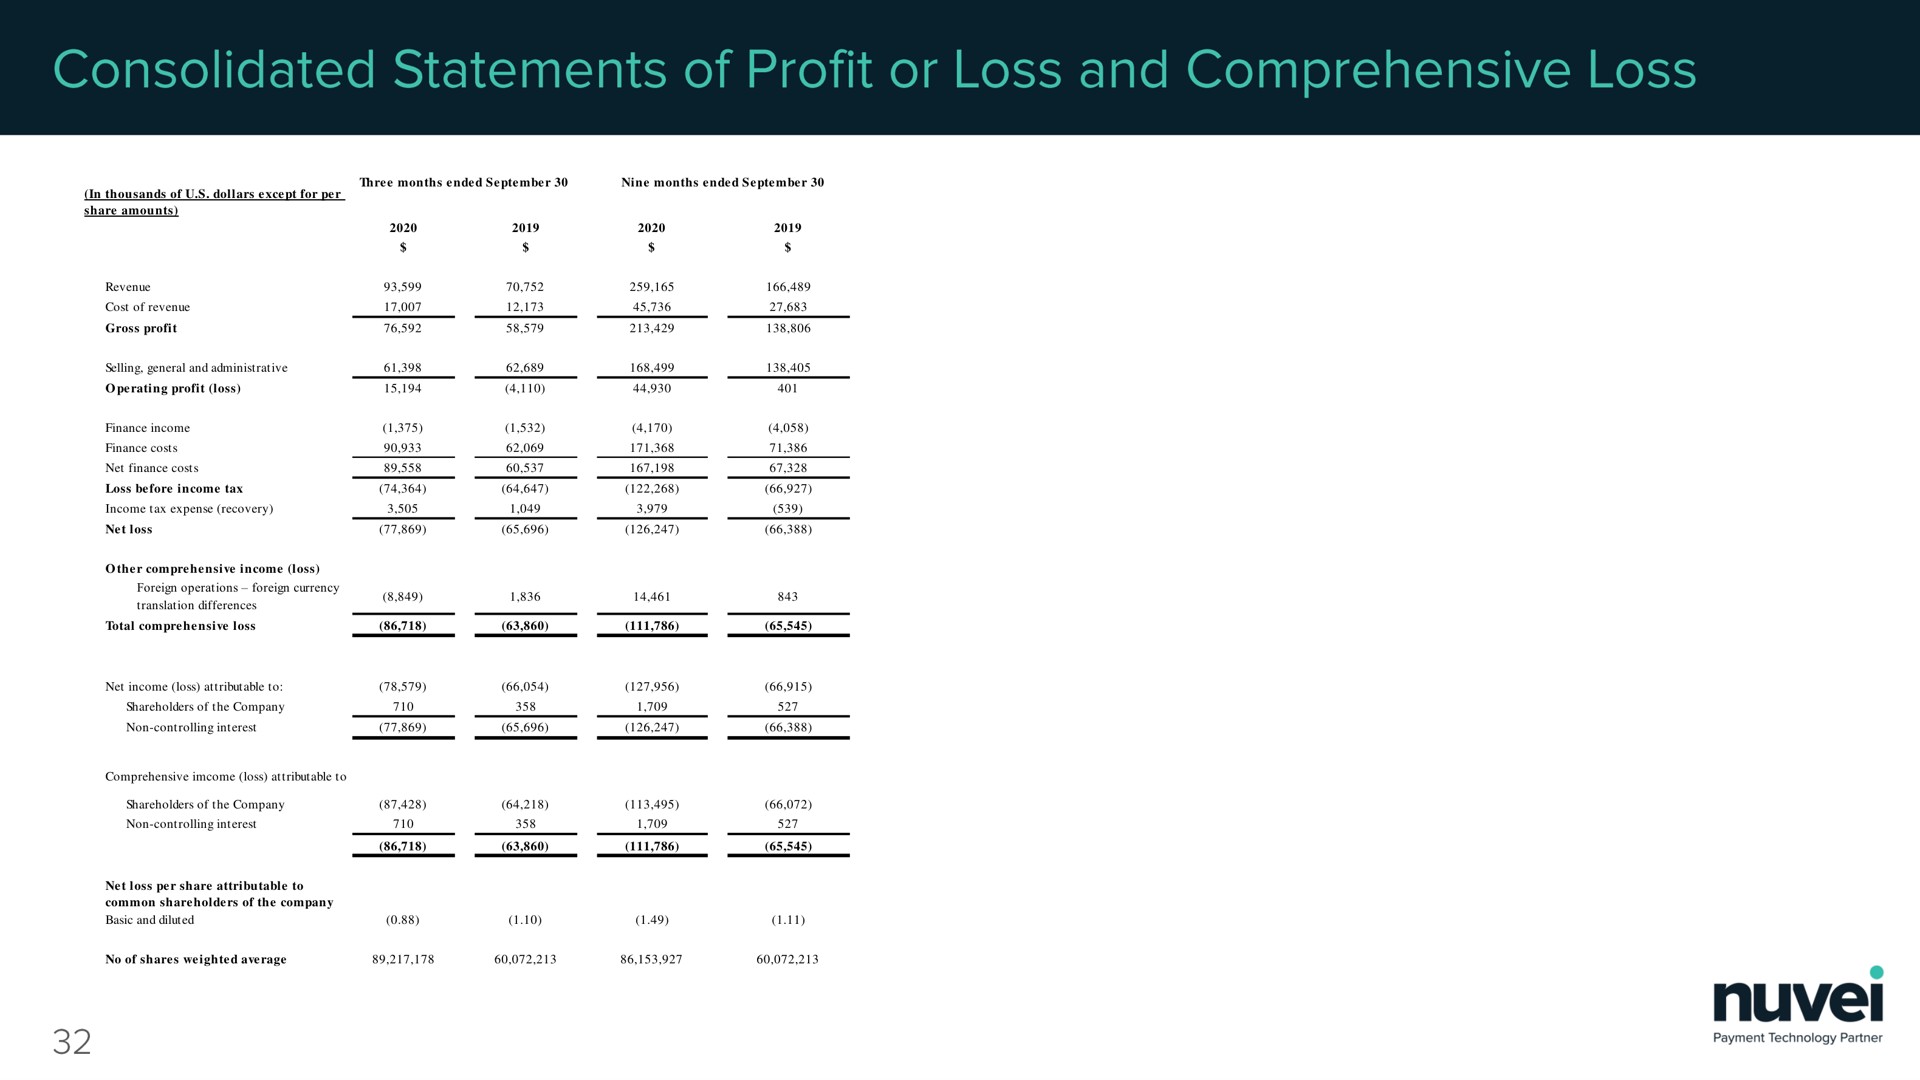 consolidated statements of profit or loss and comprehensive loss | Nuvei